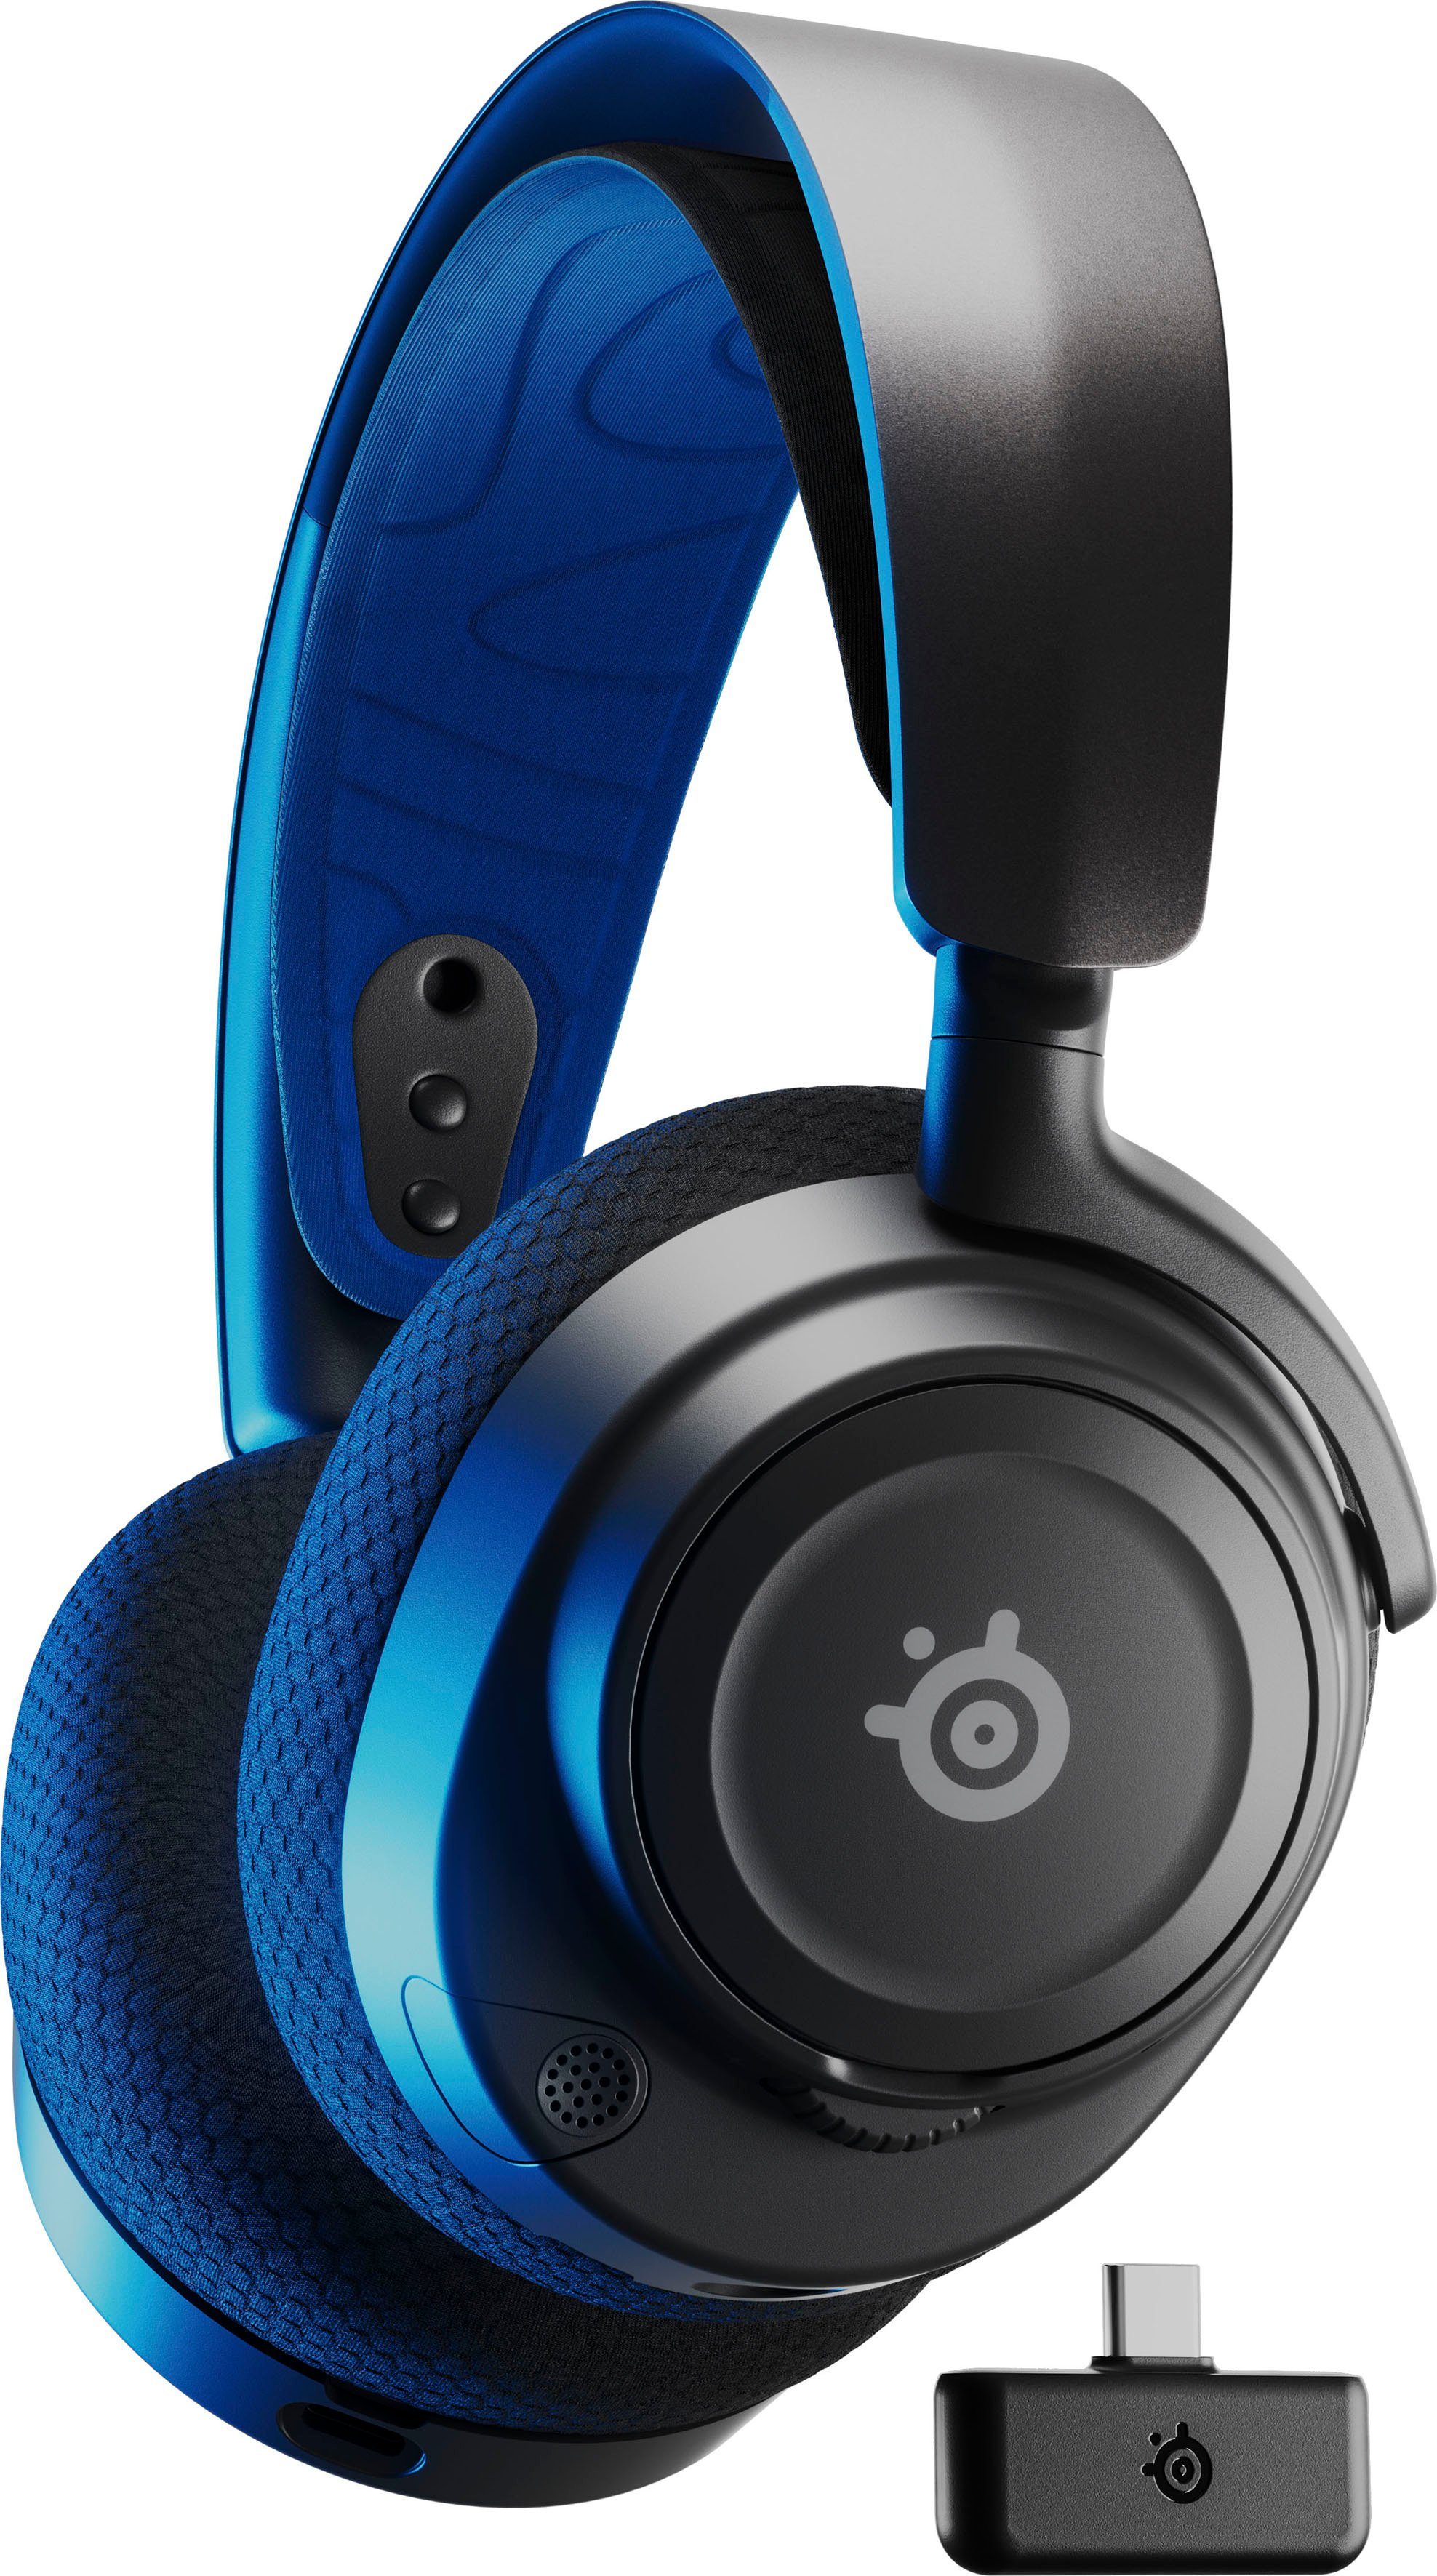 (Noise-Cancelling, SteelSeries Wireless) 7P Arctis Gaming-Headset Nova Bluetooth,